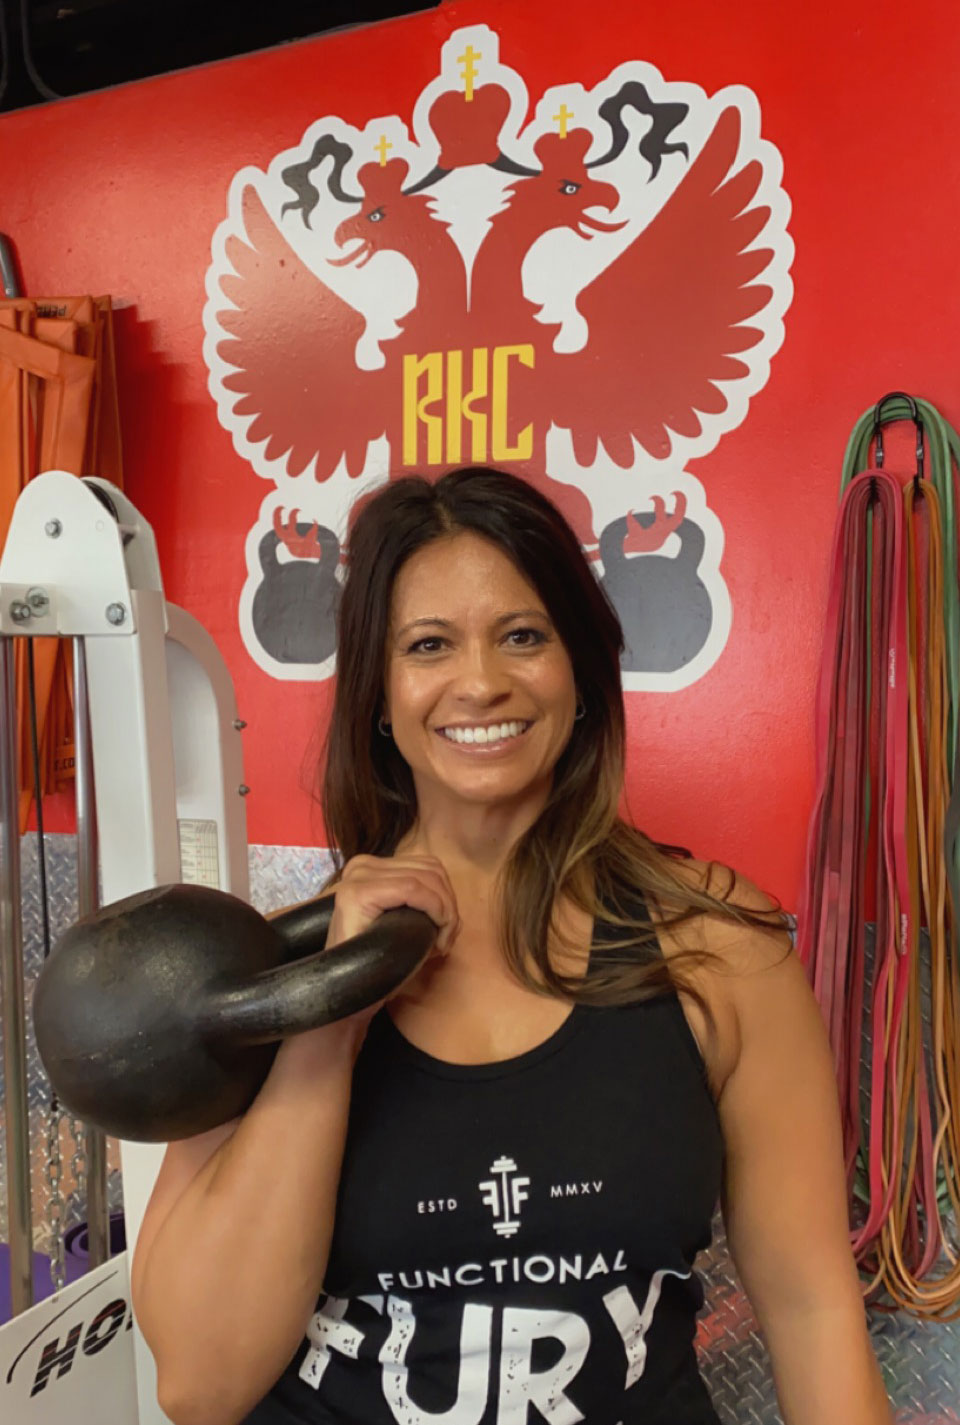 Jessica Pino RKC standing with kettlebell at Functional Fury Gym in New Mexico